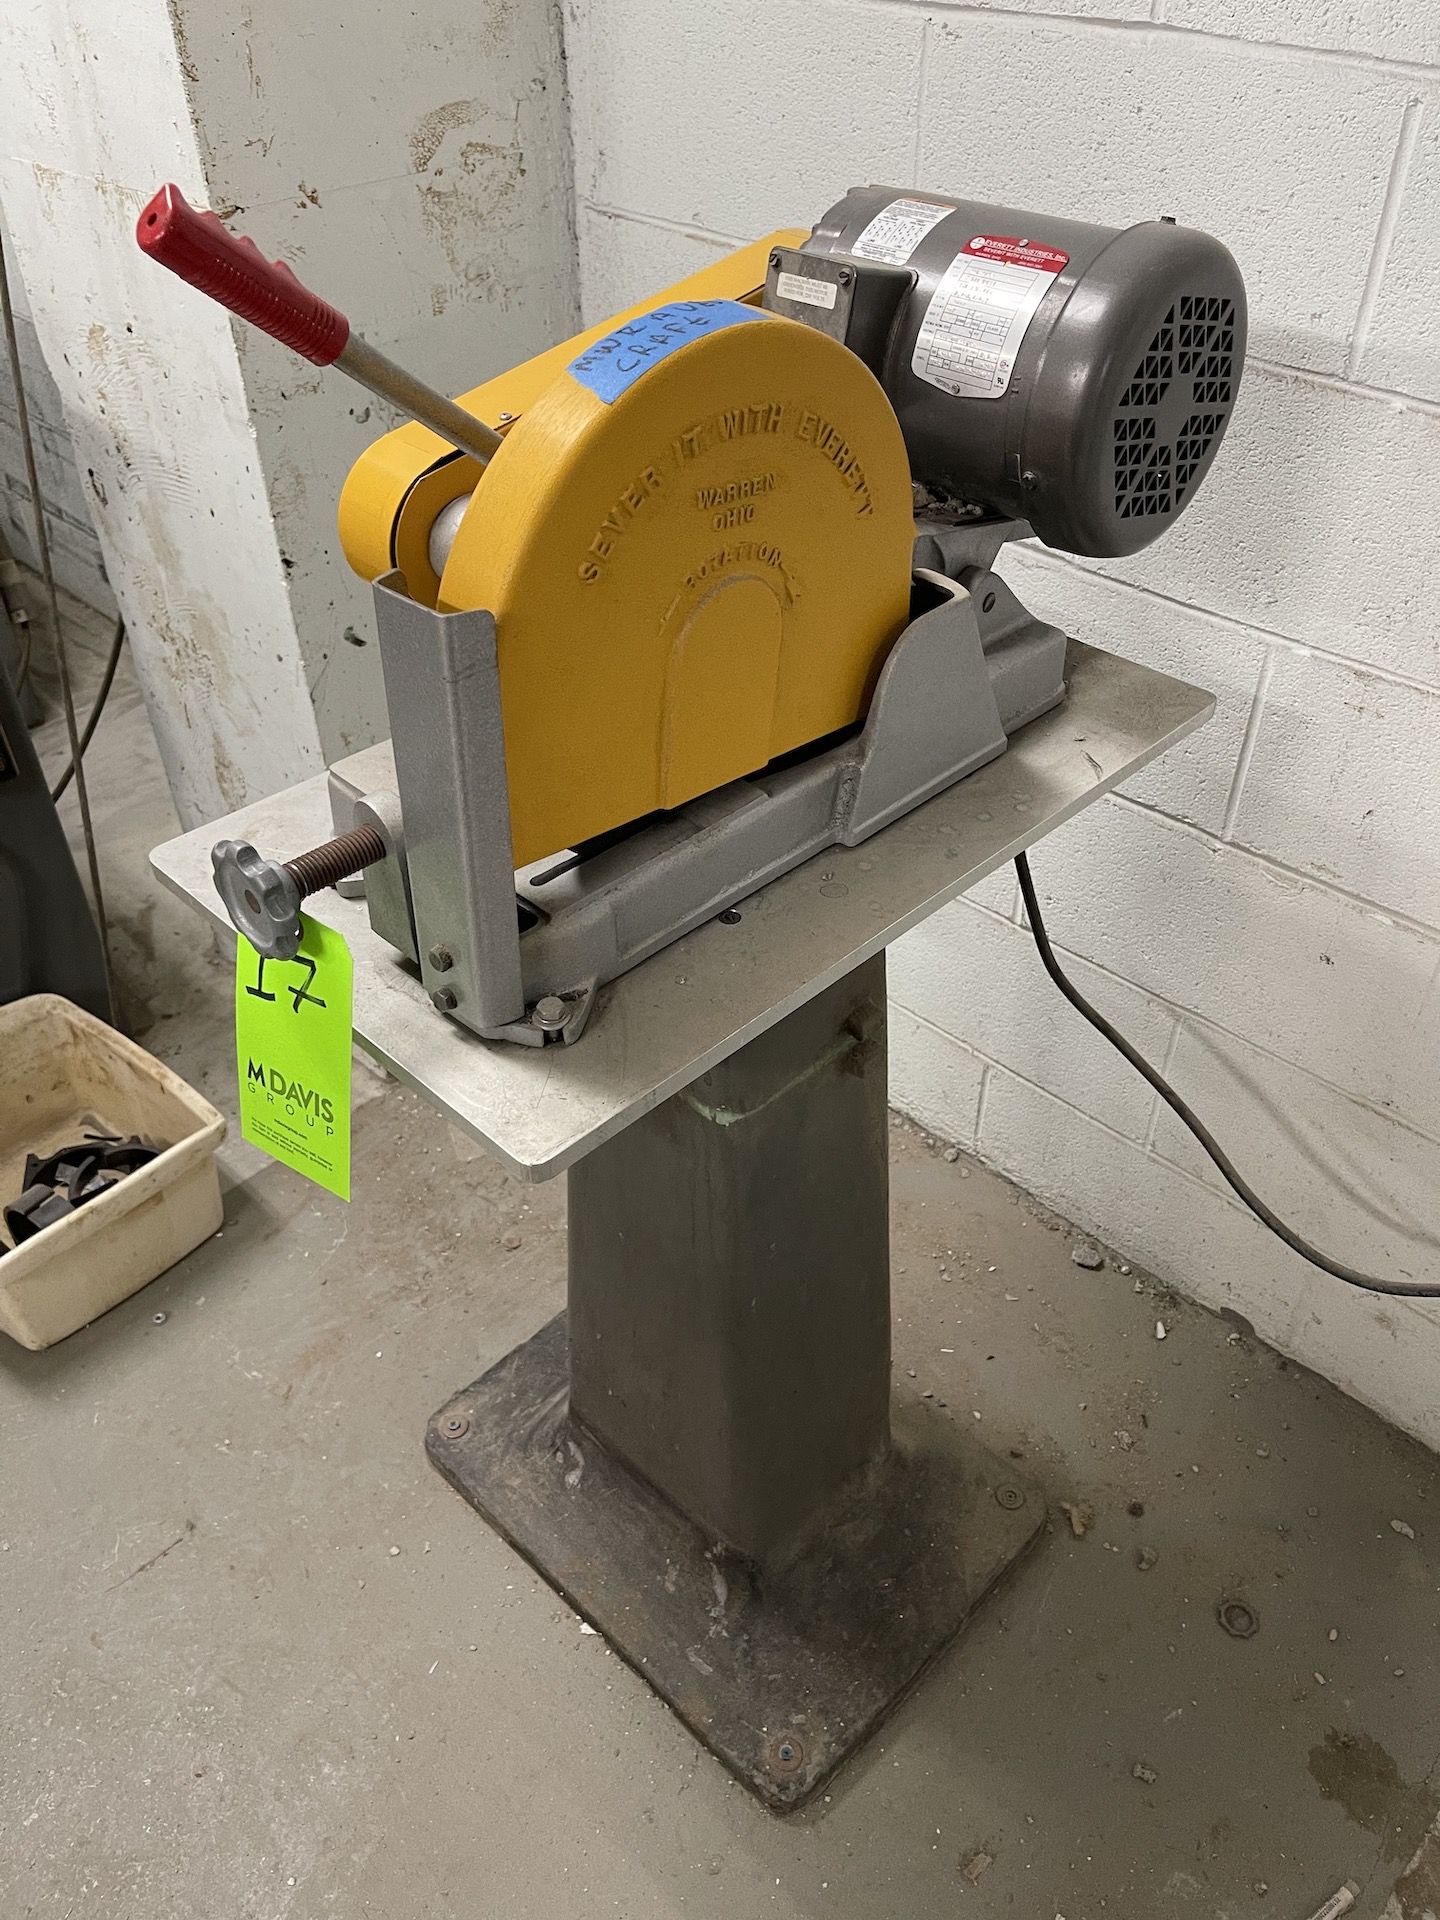 EVERETT 10'' METAL CUTTER, S/N 09-2026, 3 HP MOTOR, 3450 RPM, 208-230/460 V (Non-Negotiable Rigging, - Image 3 of 6